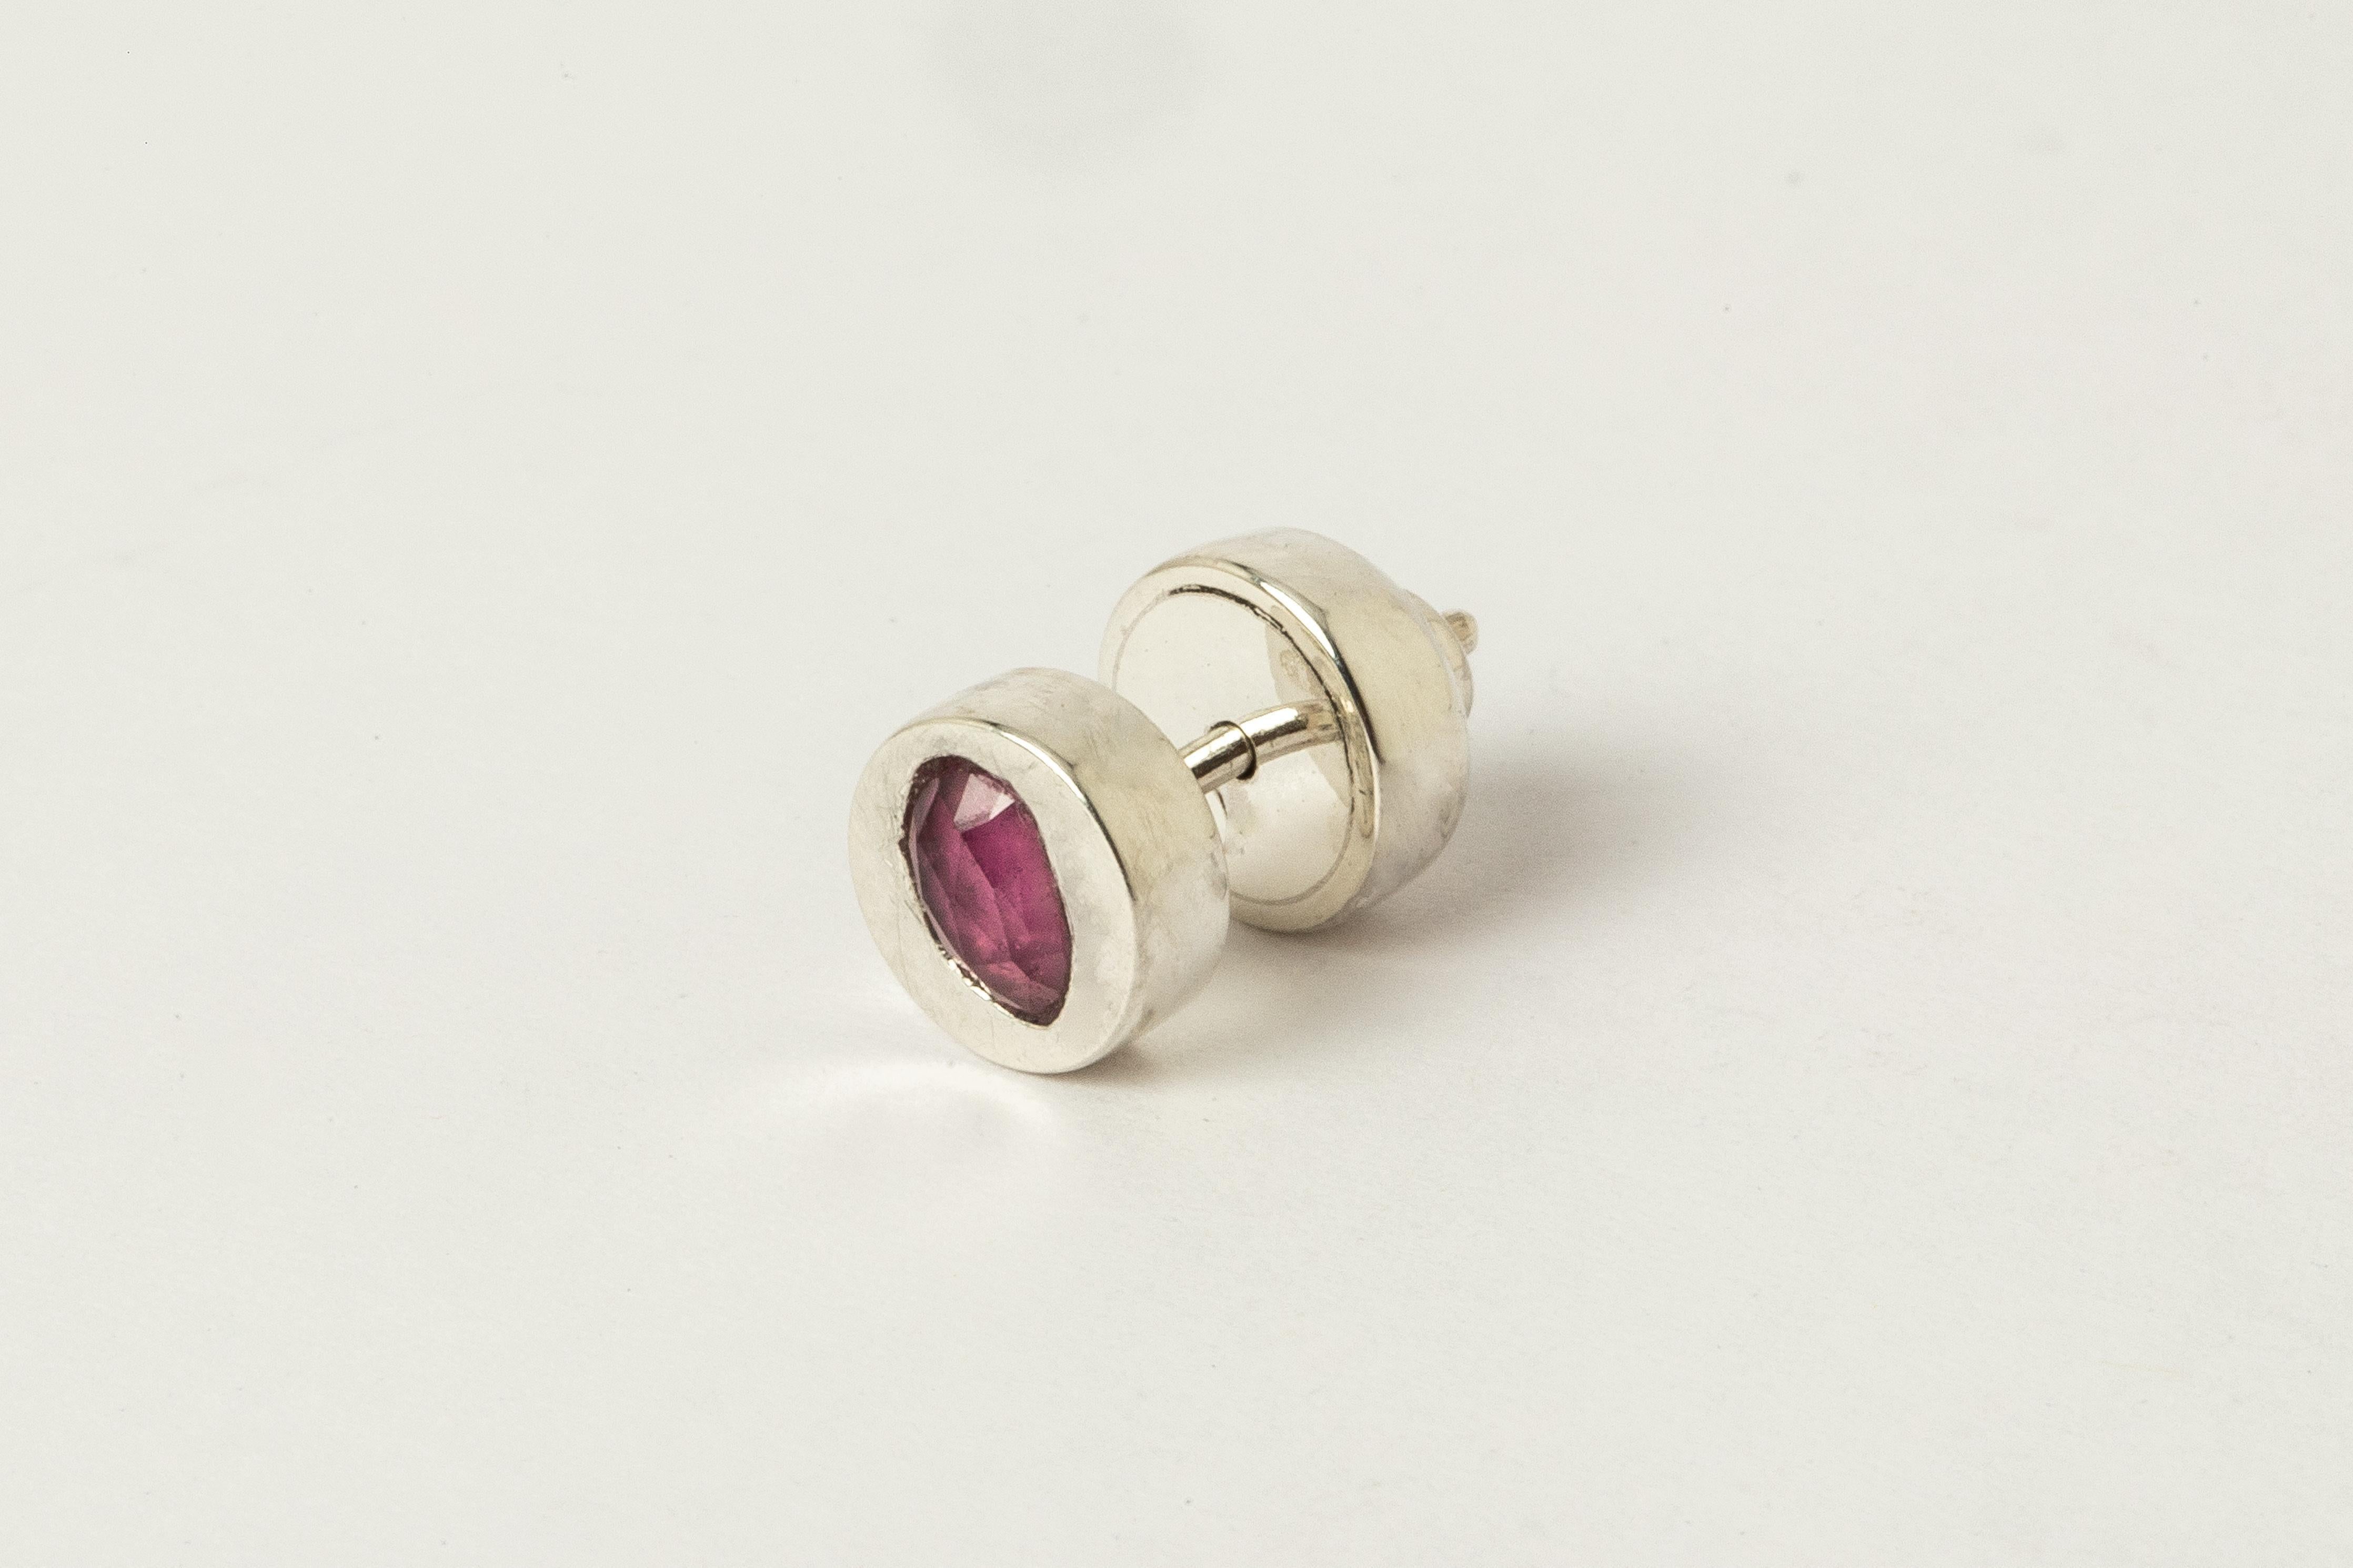 Stud earring in sterling silver and a slab of rough ruby (faceted). This item is made with a naturally occurring element and will vary from the photograph you see. Each piece is unique and this is what makes it special.
Sold as a single piece.